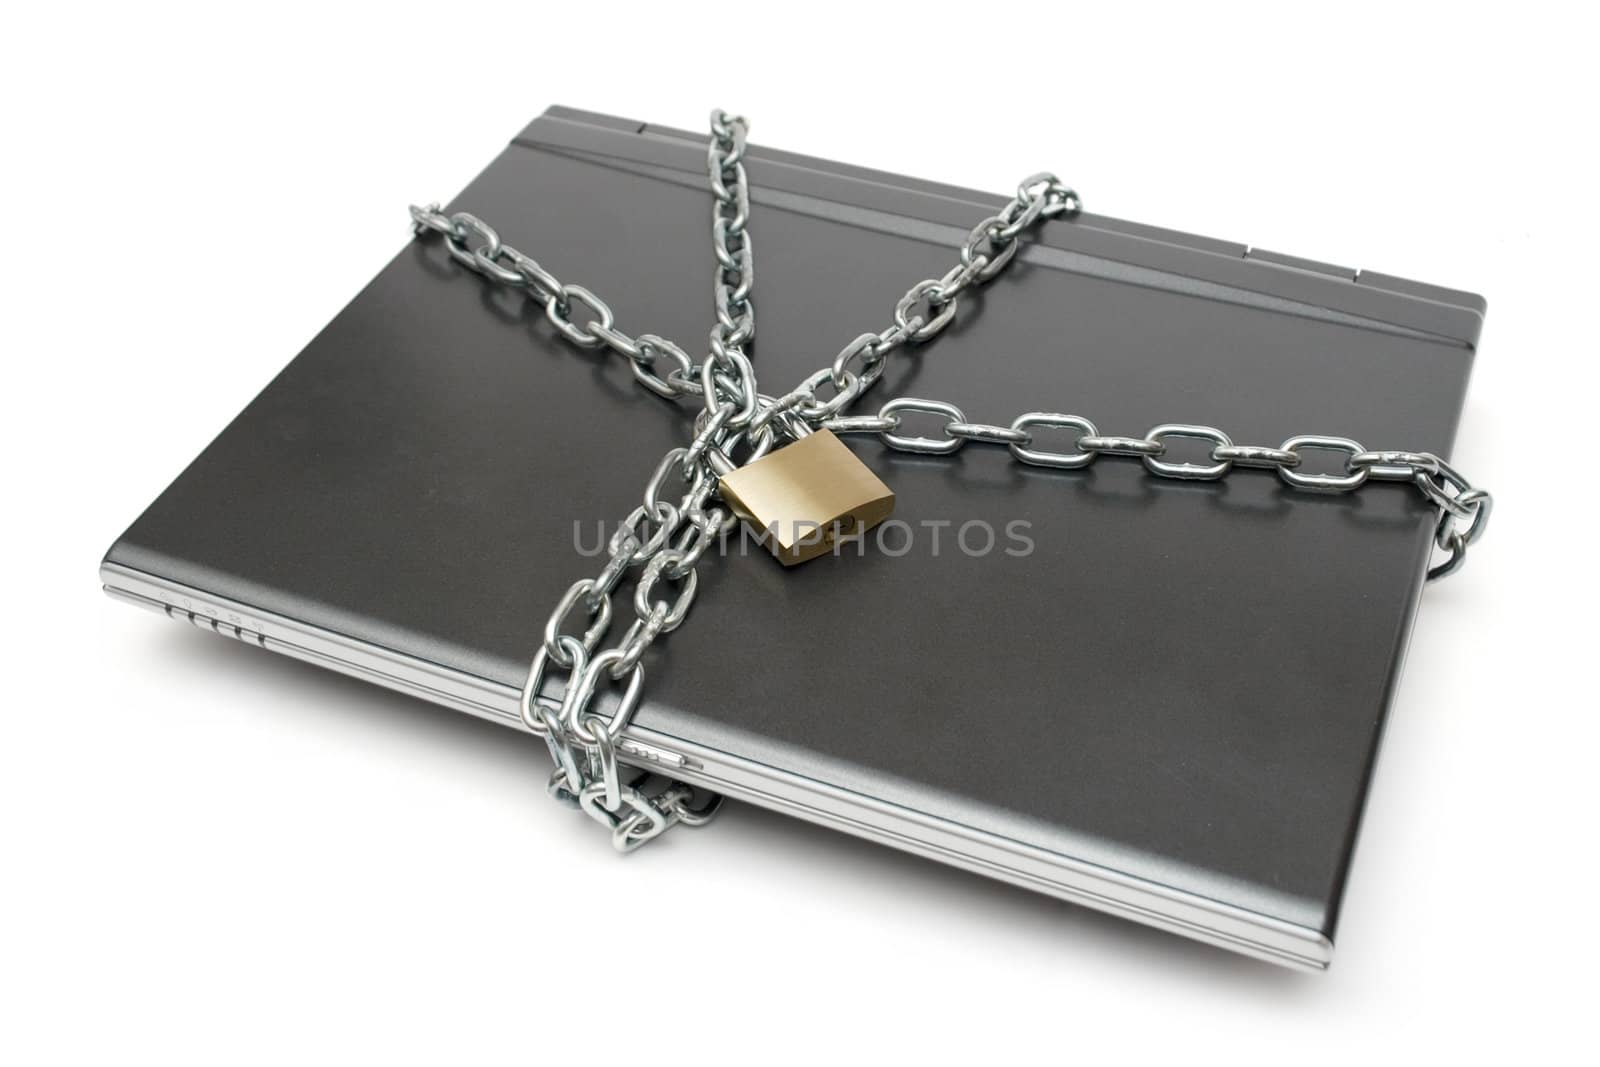 Padlock, chain and laptop isolated on a white background.